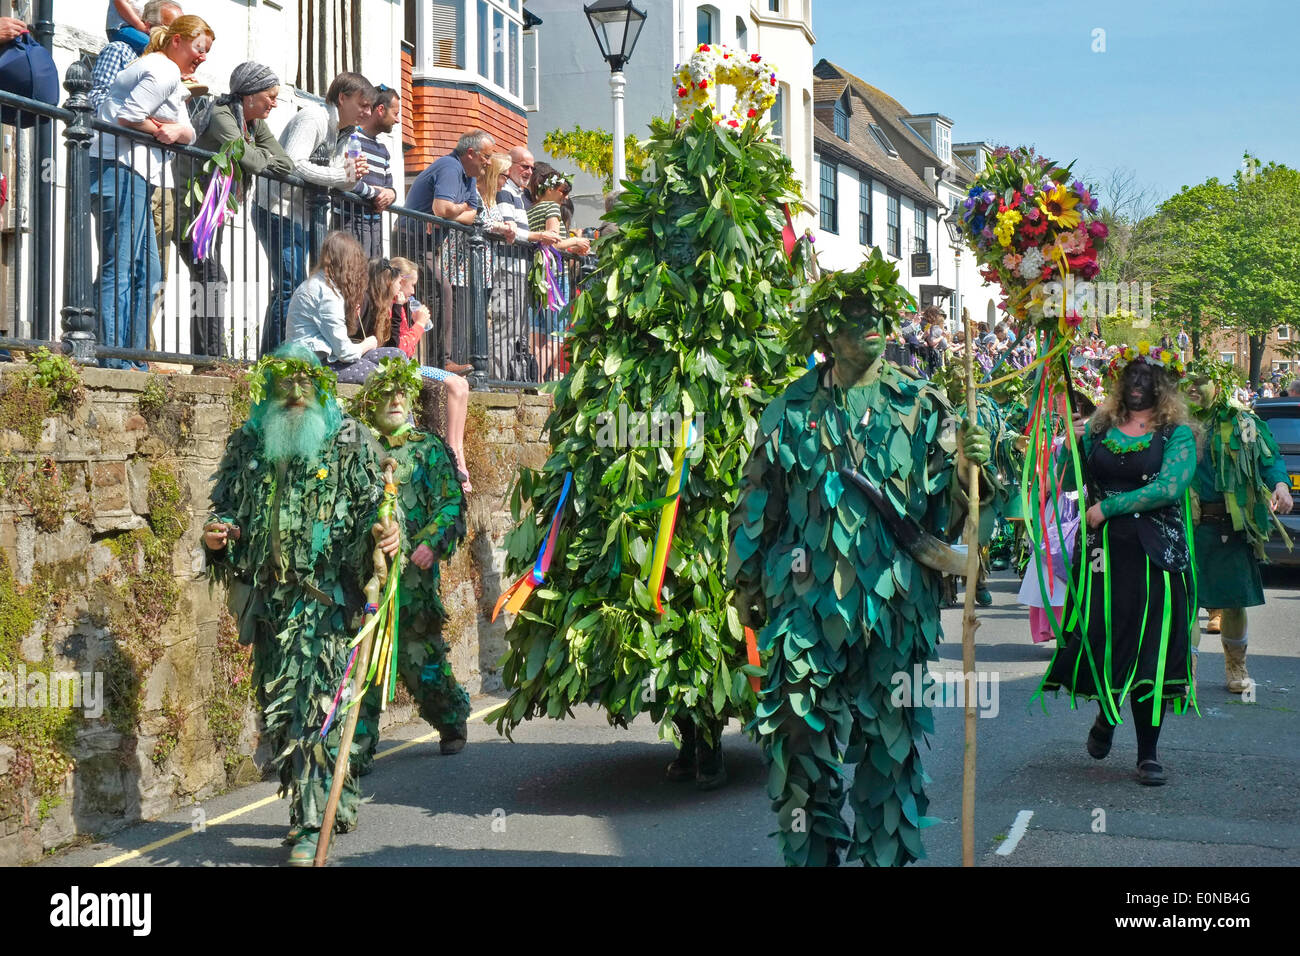 Hastings UK 5th May 2014 Traditional Jack in the Green, May Day Festival, East Sussex, England, UK, GB. Hastings Old Town High Street. Stock Photo